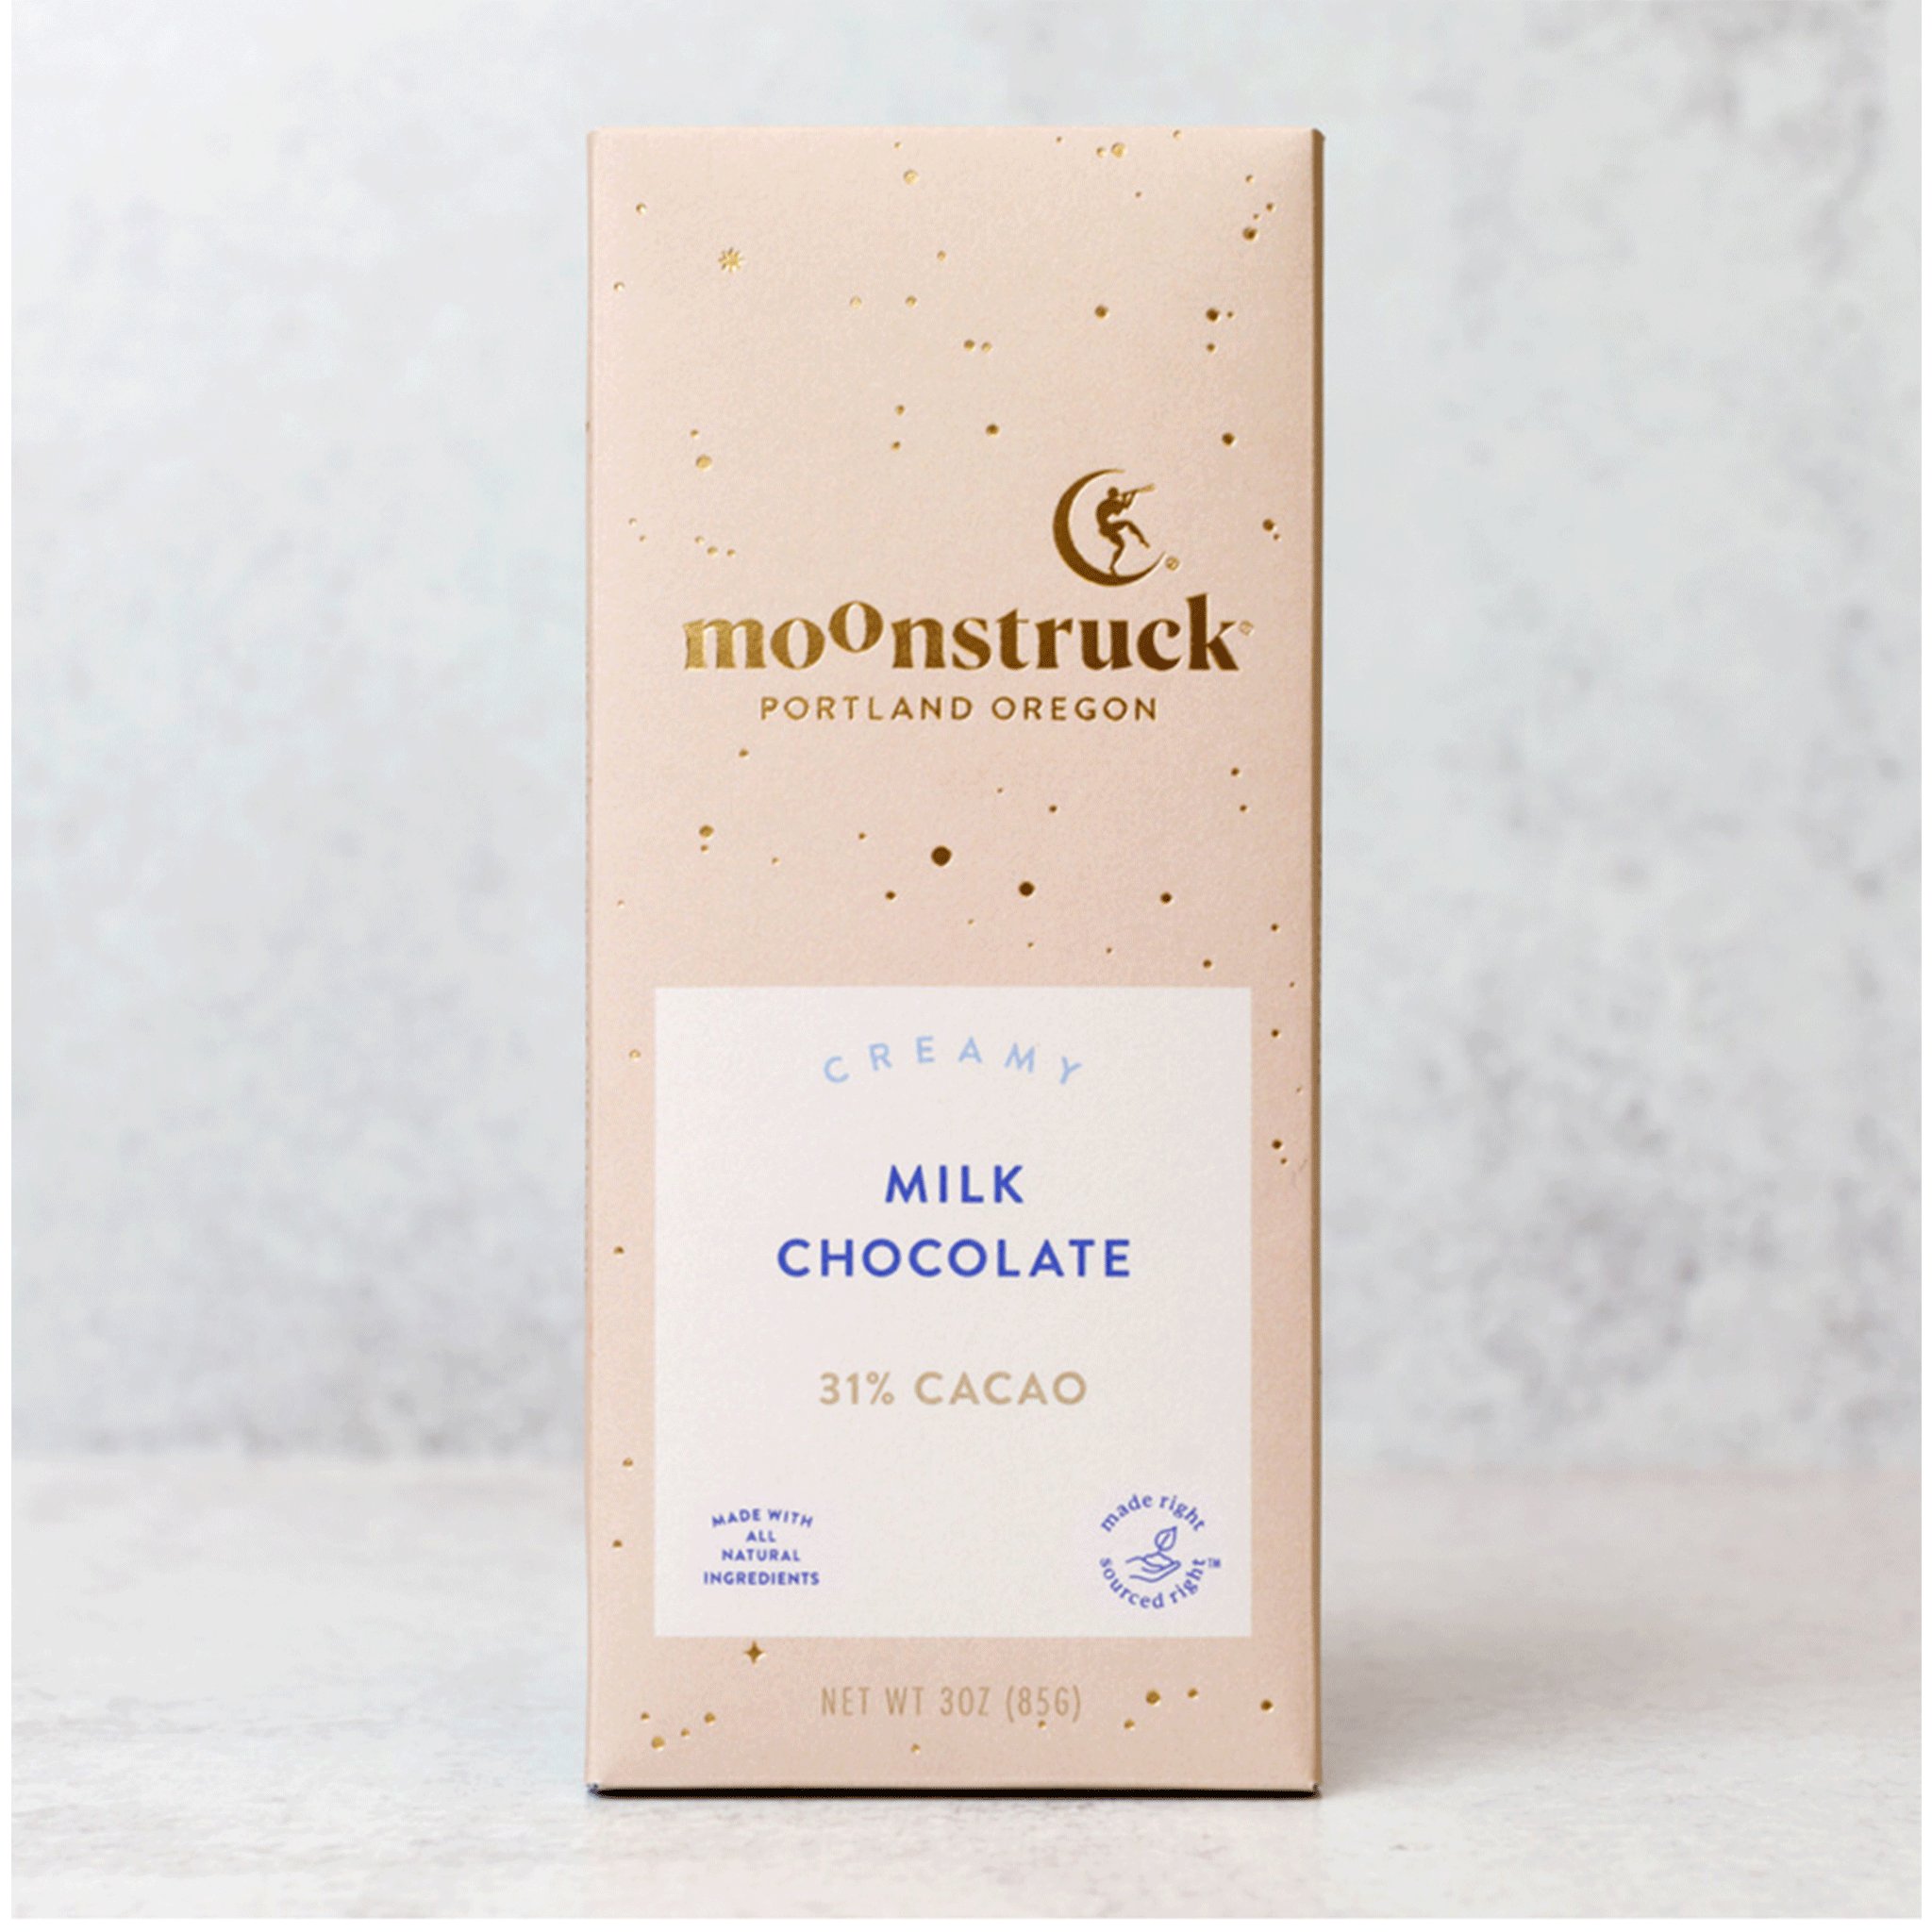 On a grey background is a tan packaged chocolate bar with gold details and text that reads, "moonstruck Portland Oregon", "Creamy Milk Chocolate 31% Cacao".